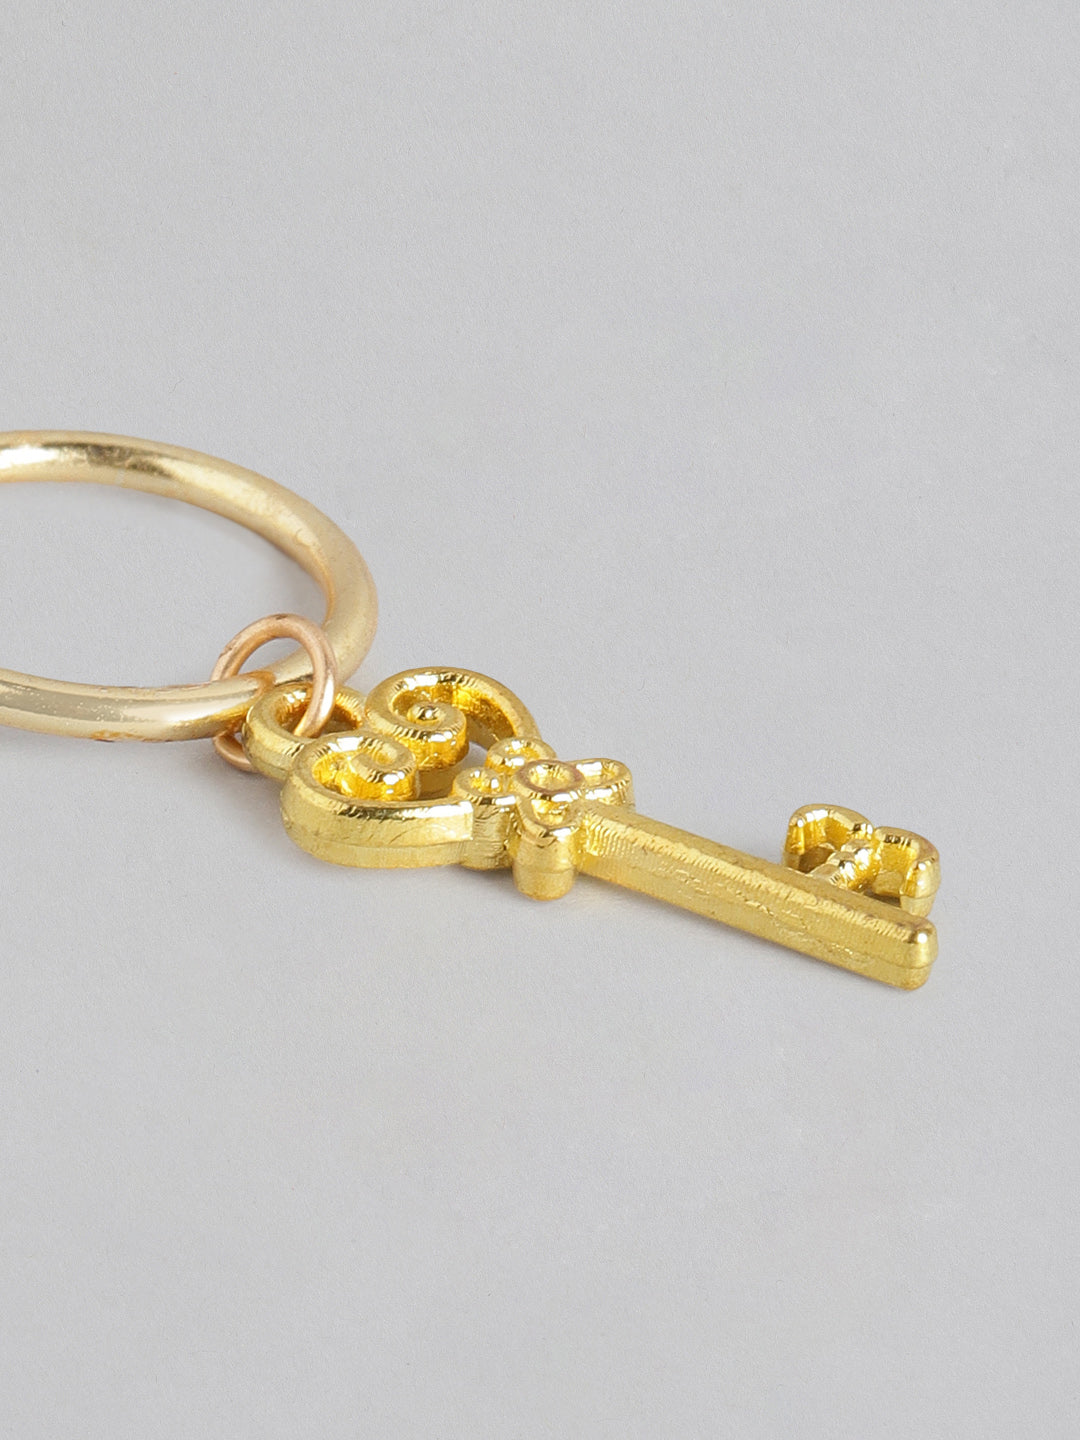 Blueberry Kids gold plated Lock And Key drop earring